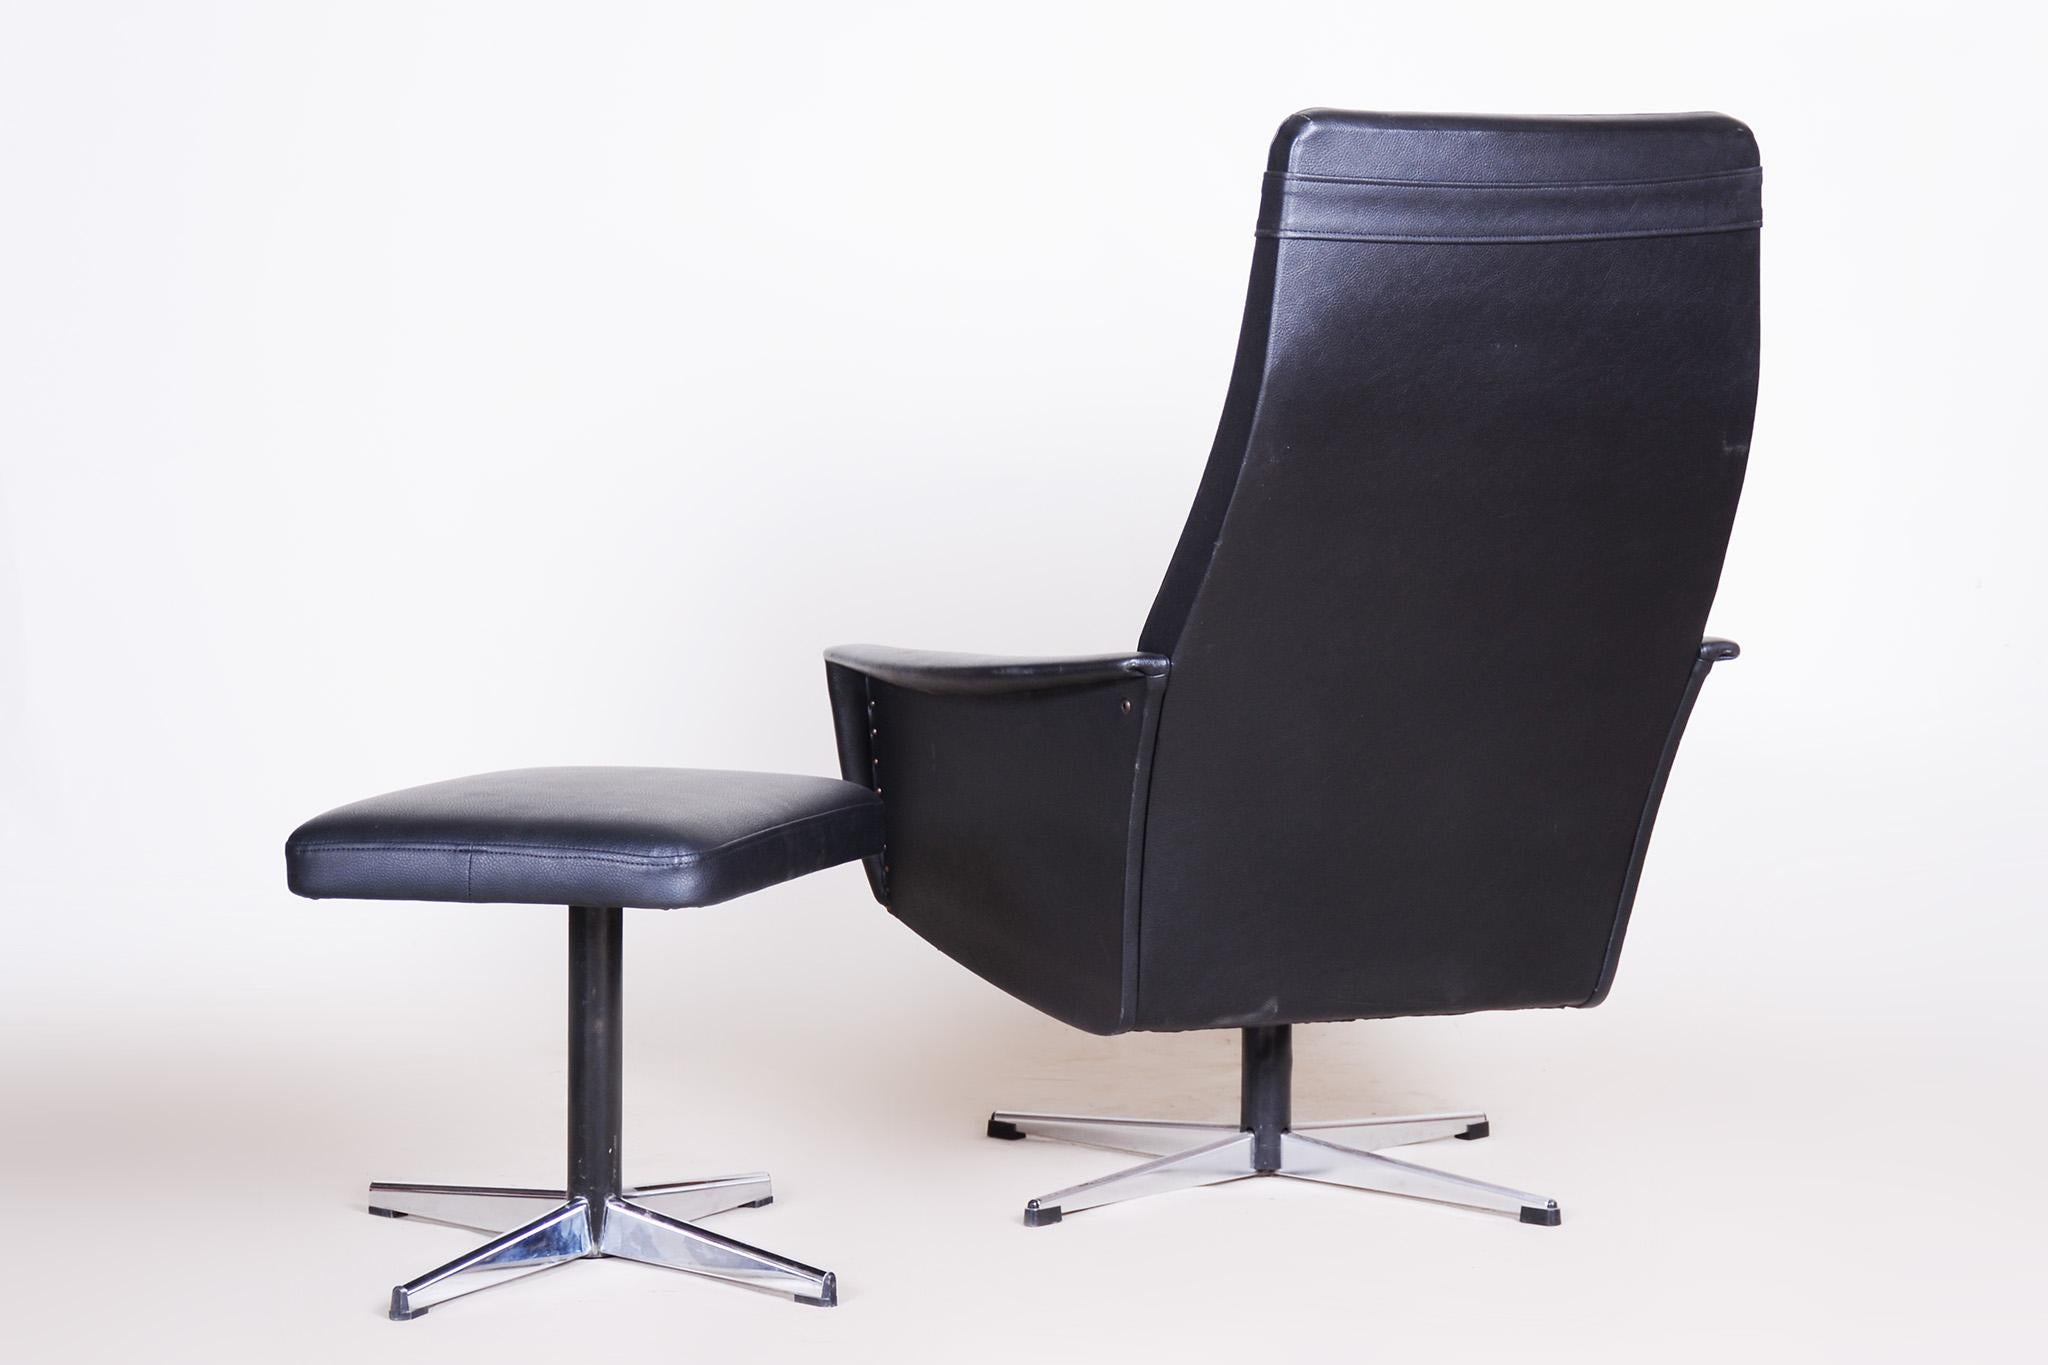 Vegan Leather Bauhaus Swivel Chair with Foot Stool, Made in 1960s Czechia For Sale 2